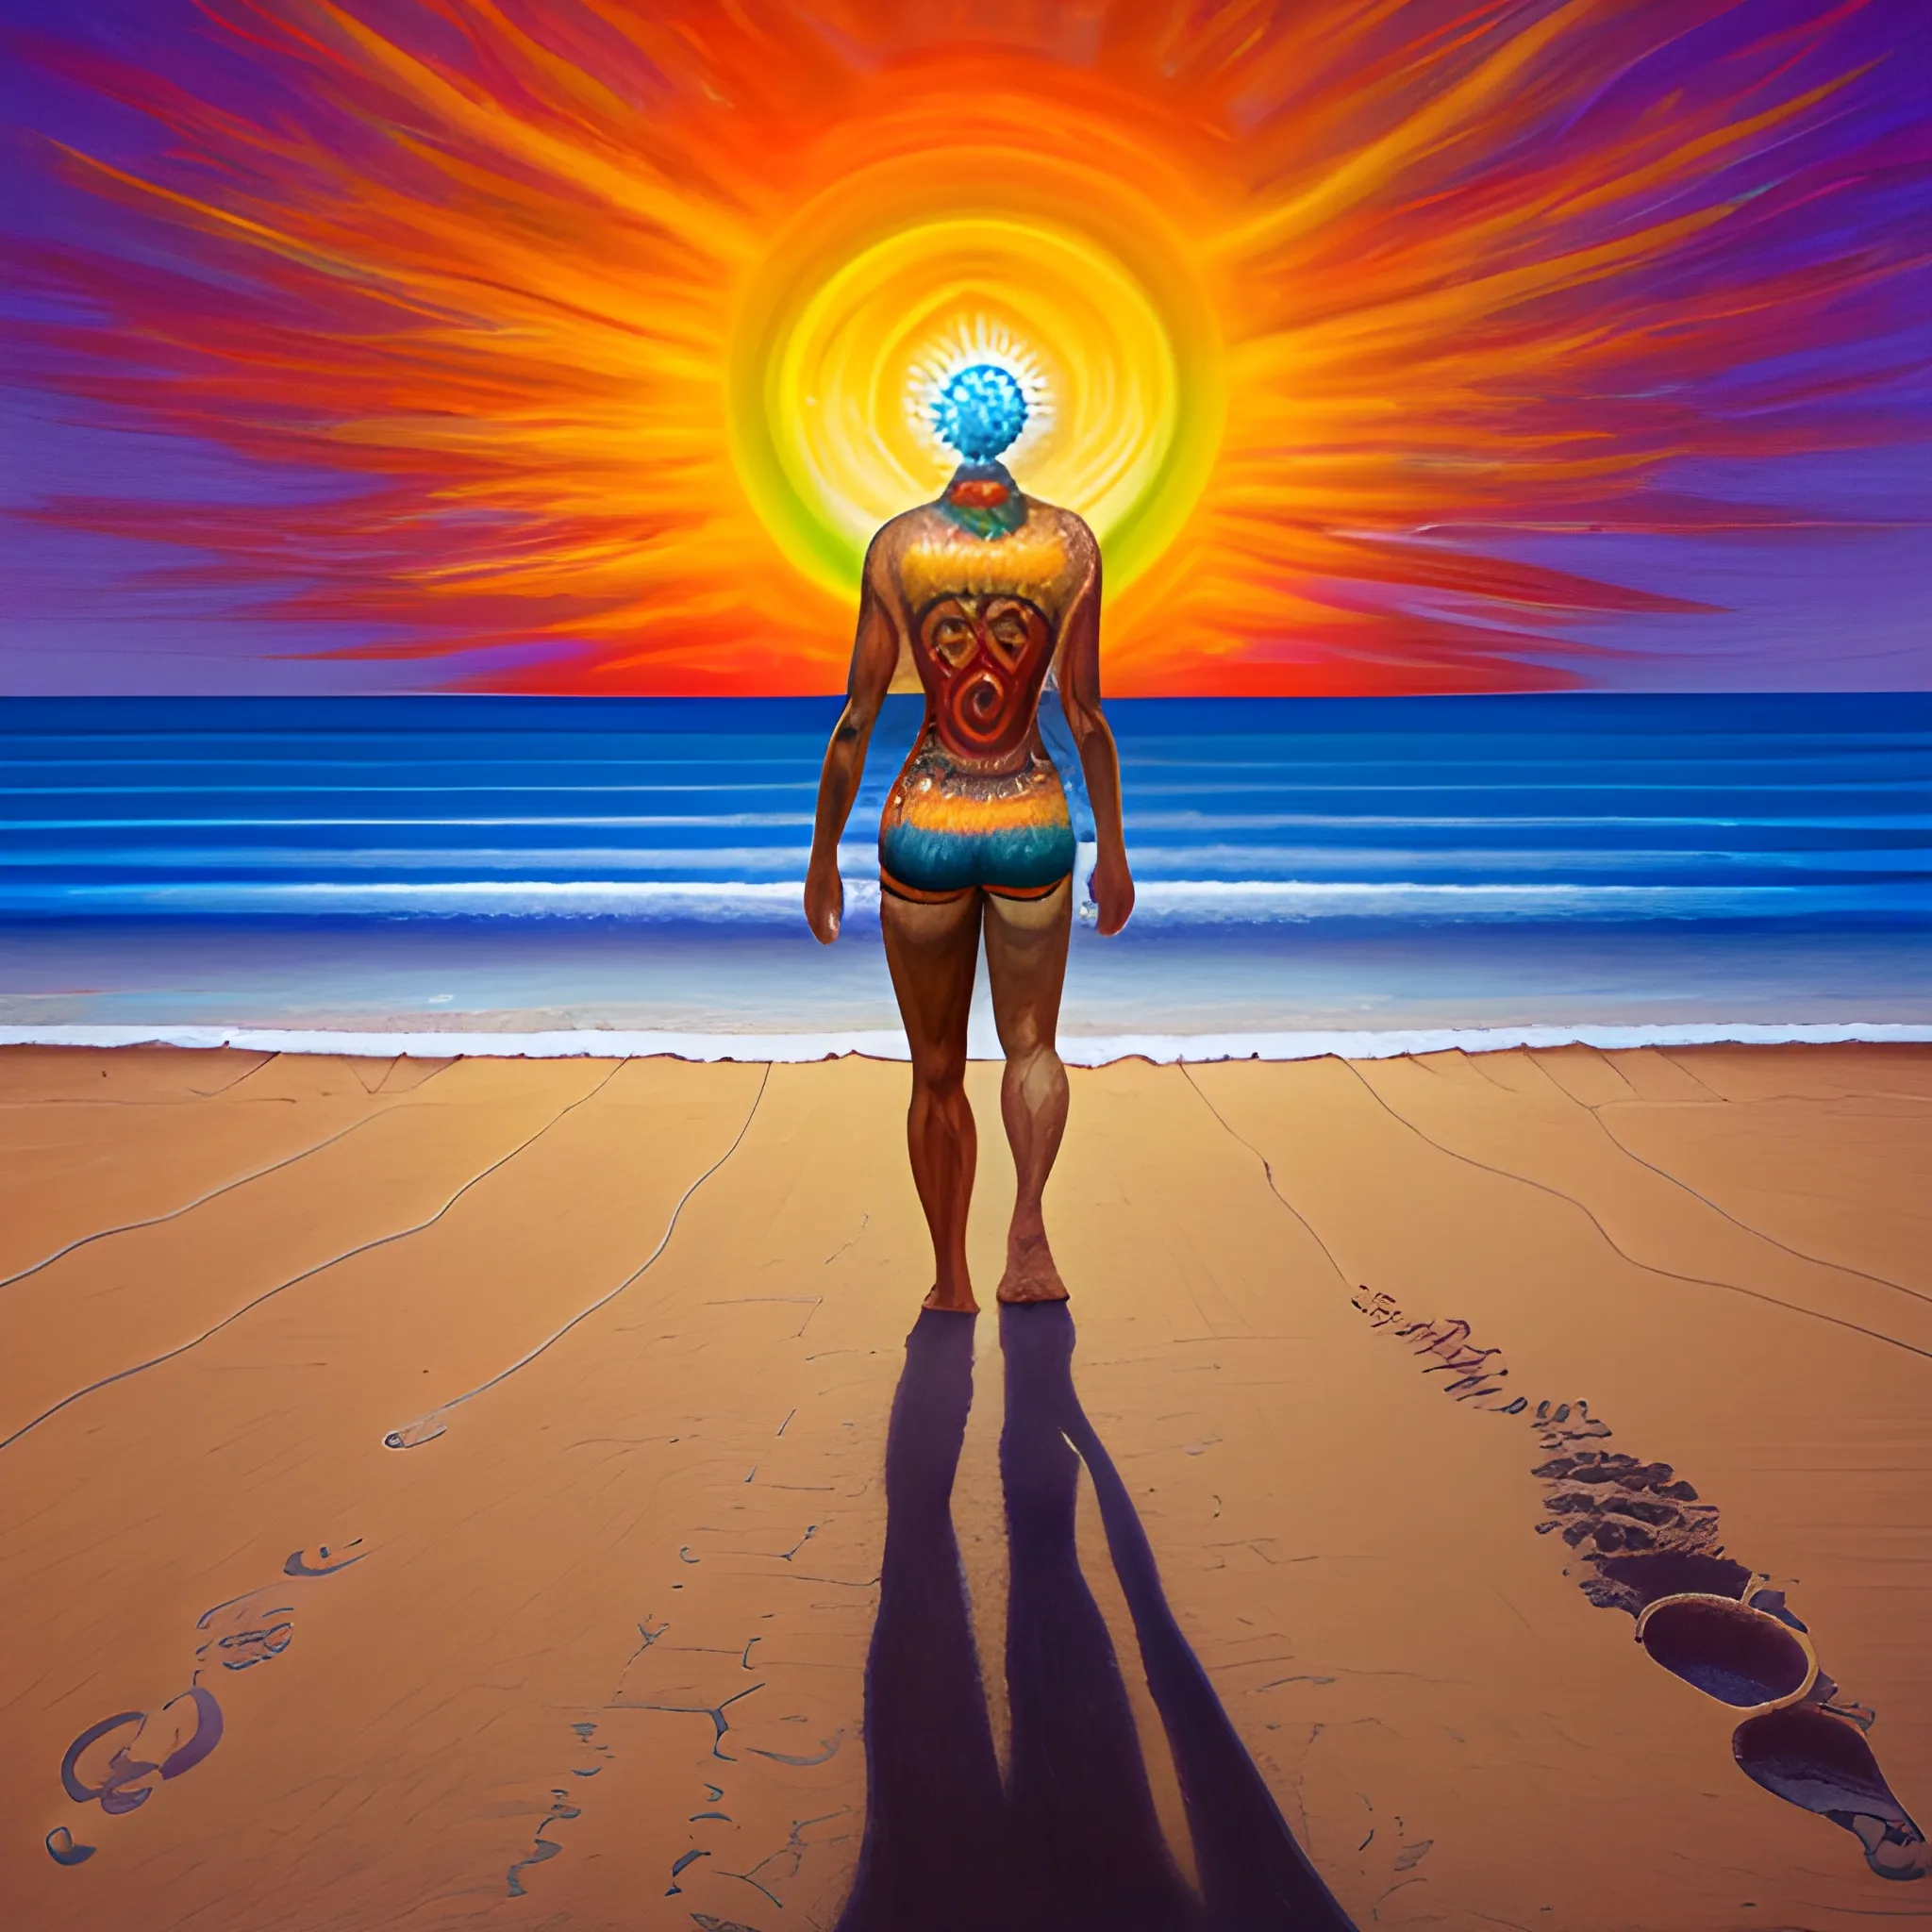 
man with the seven chakras on his back, beach, sunset, universe, walking to the sea, initiation, footprints in the sand, Oil Painting, Cartoon, Trippy